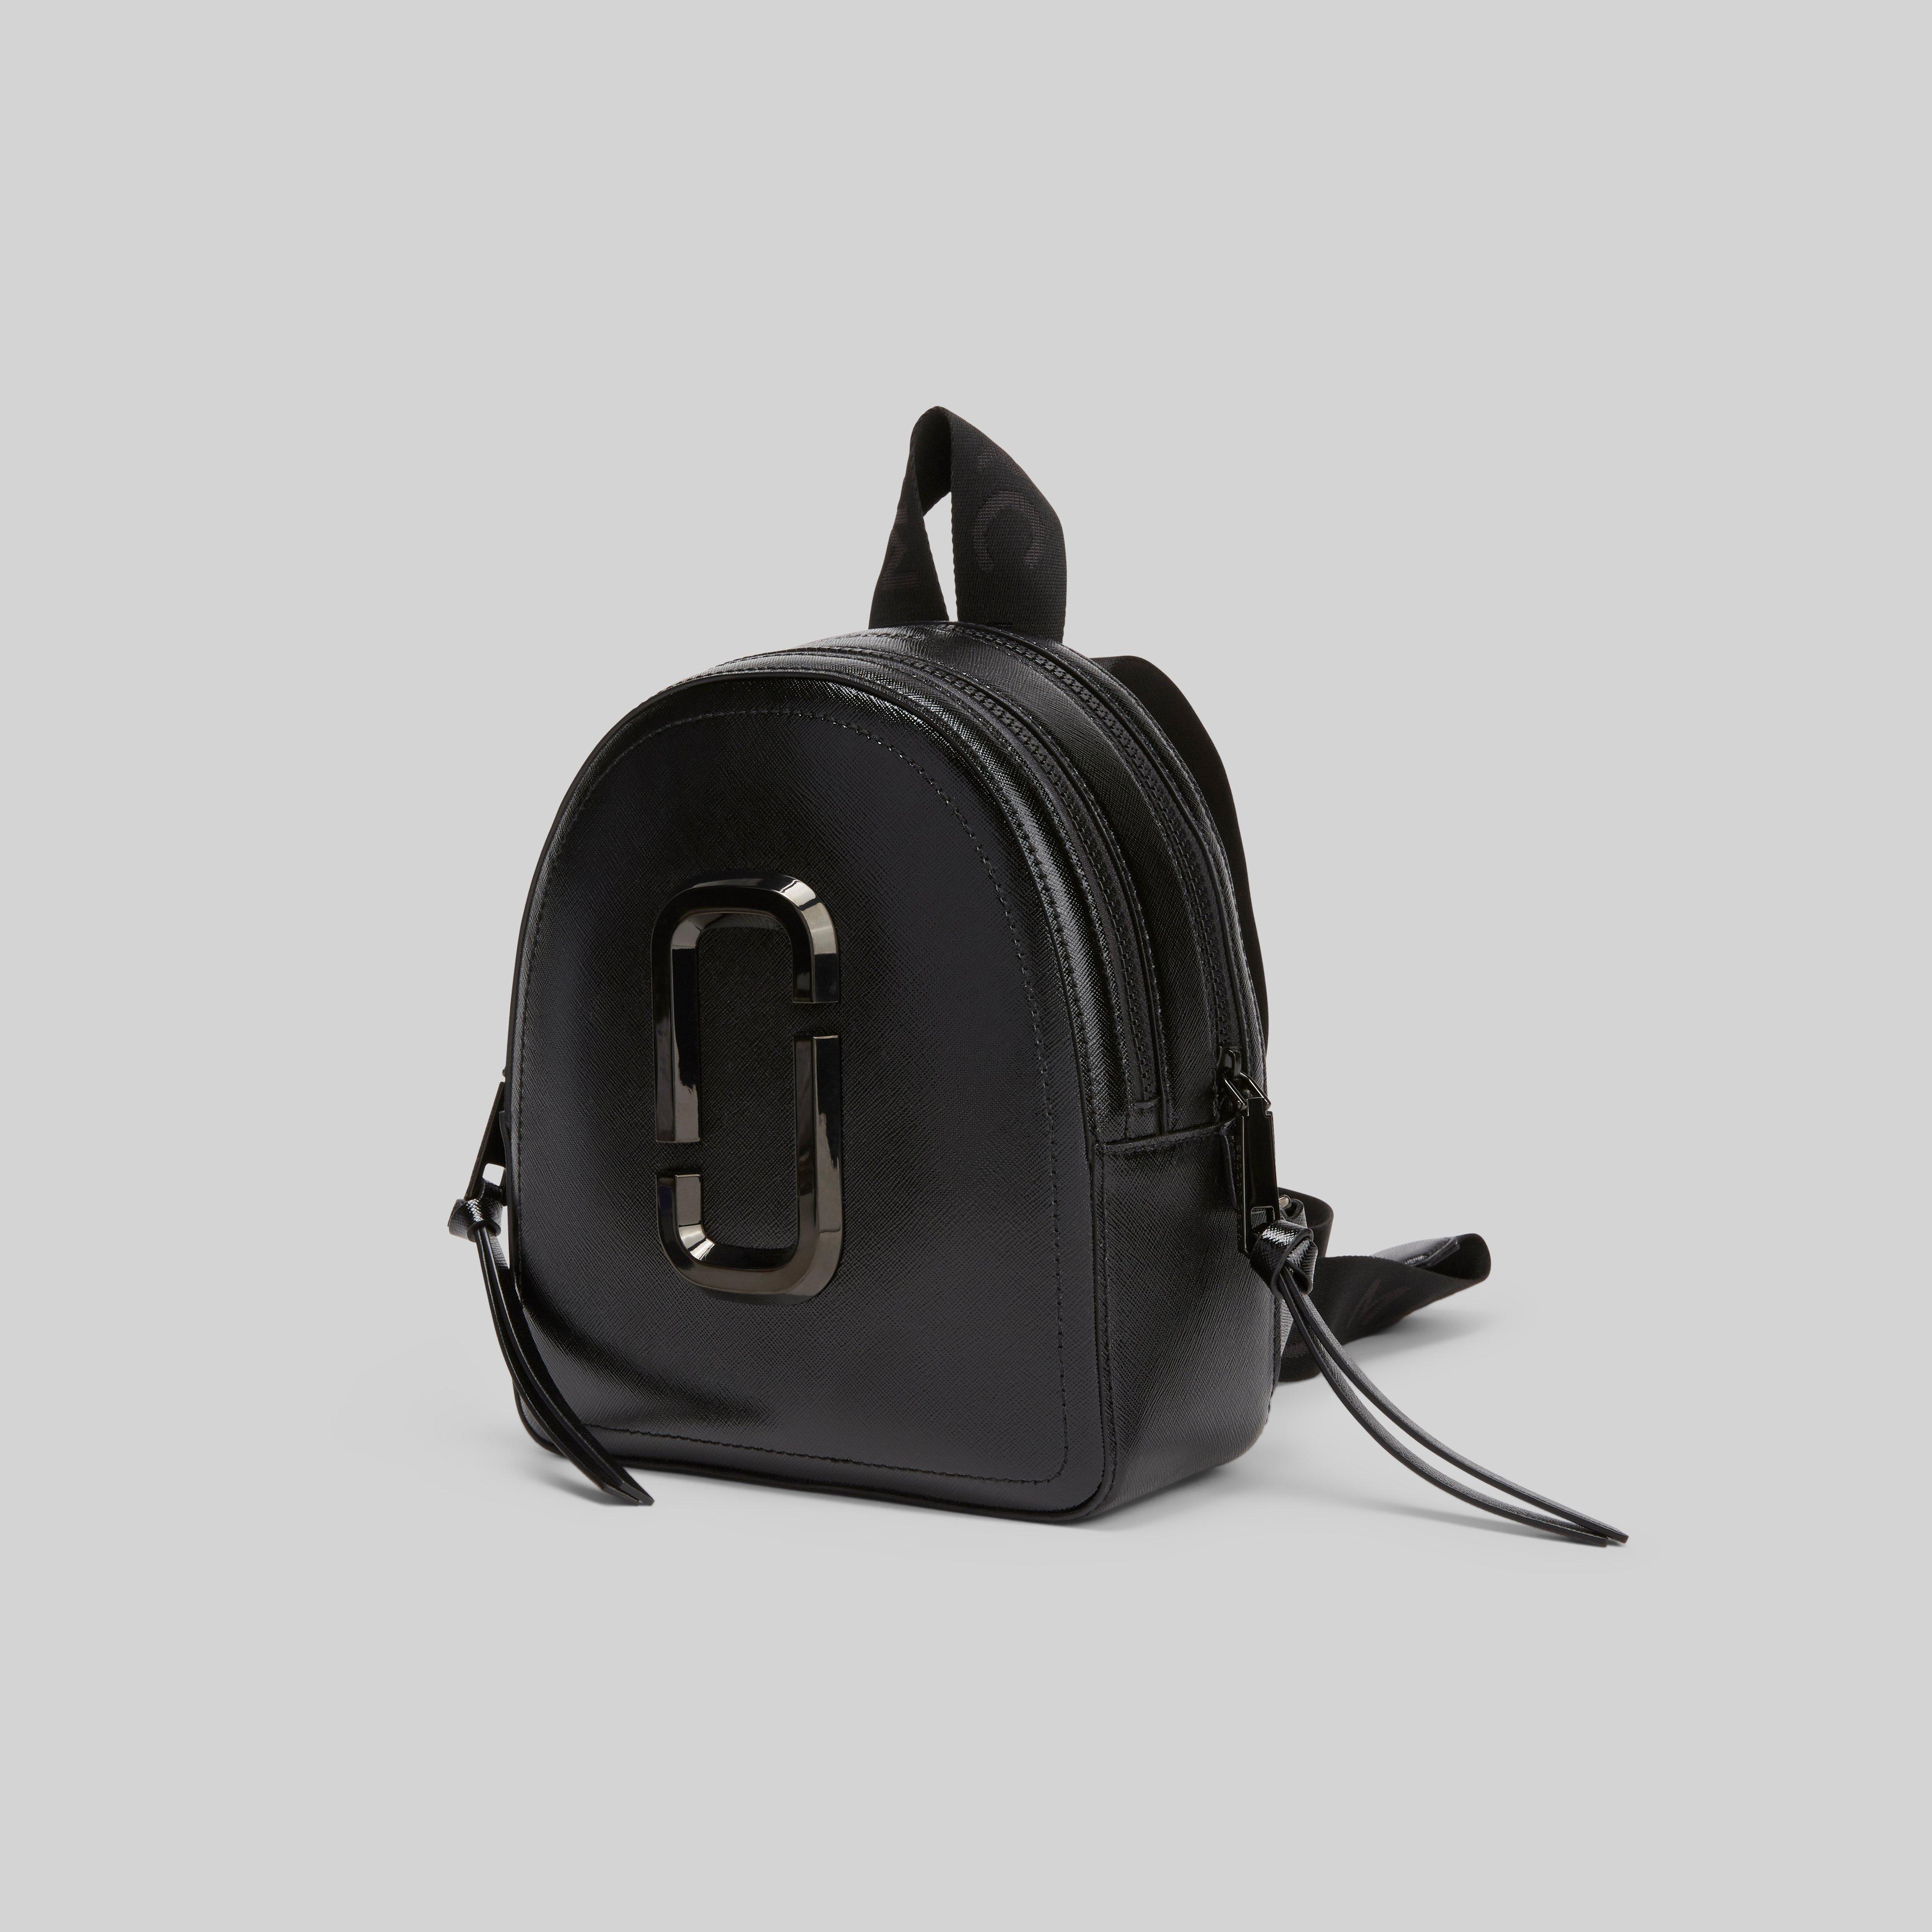 Marc Jacobs Leather The Pack Shot Dtm Backpack in Black Leather (Black) -  Lyst